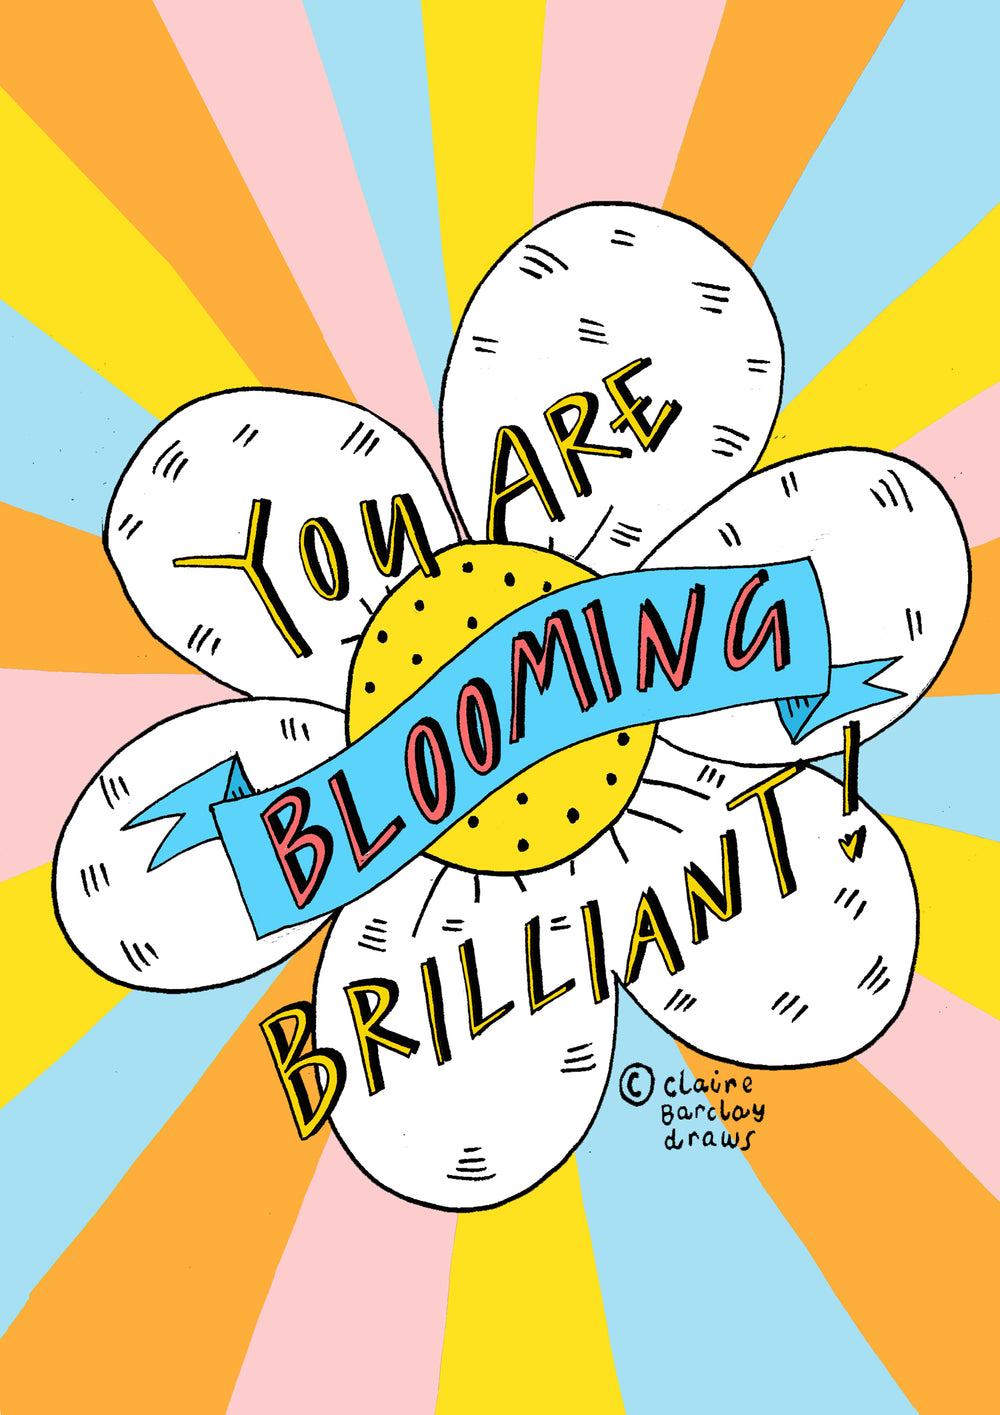 You are BLOOMING Brilliant! Greetings Card